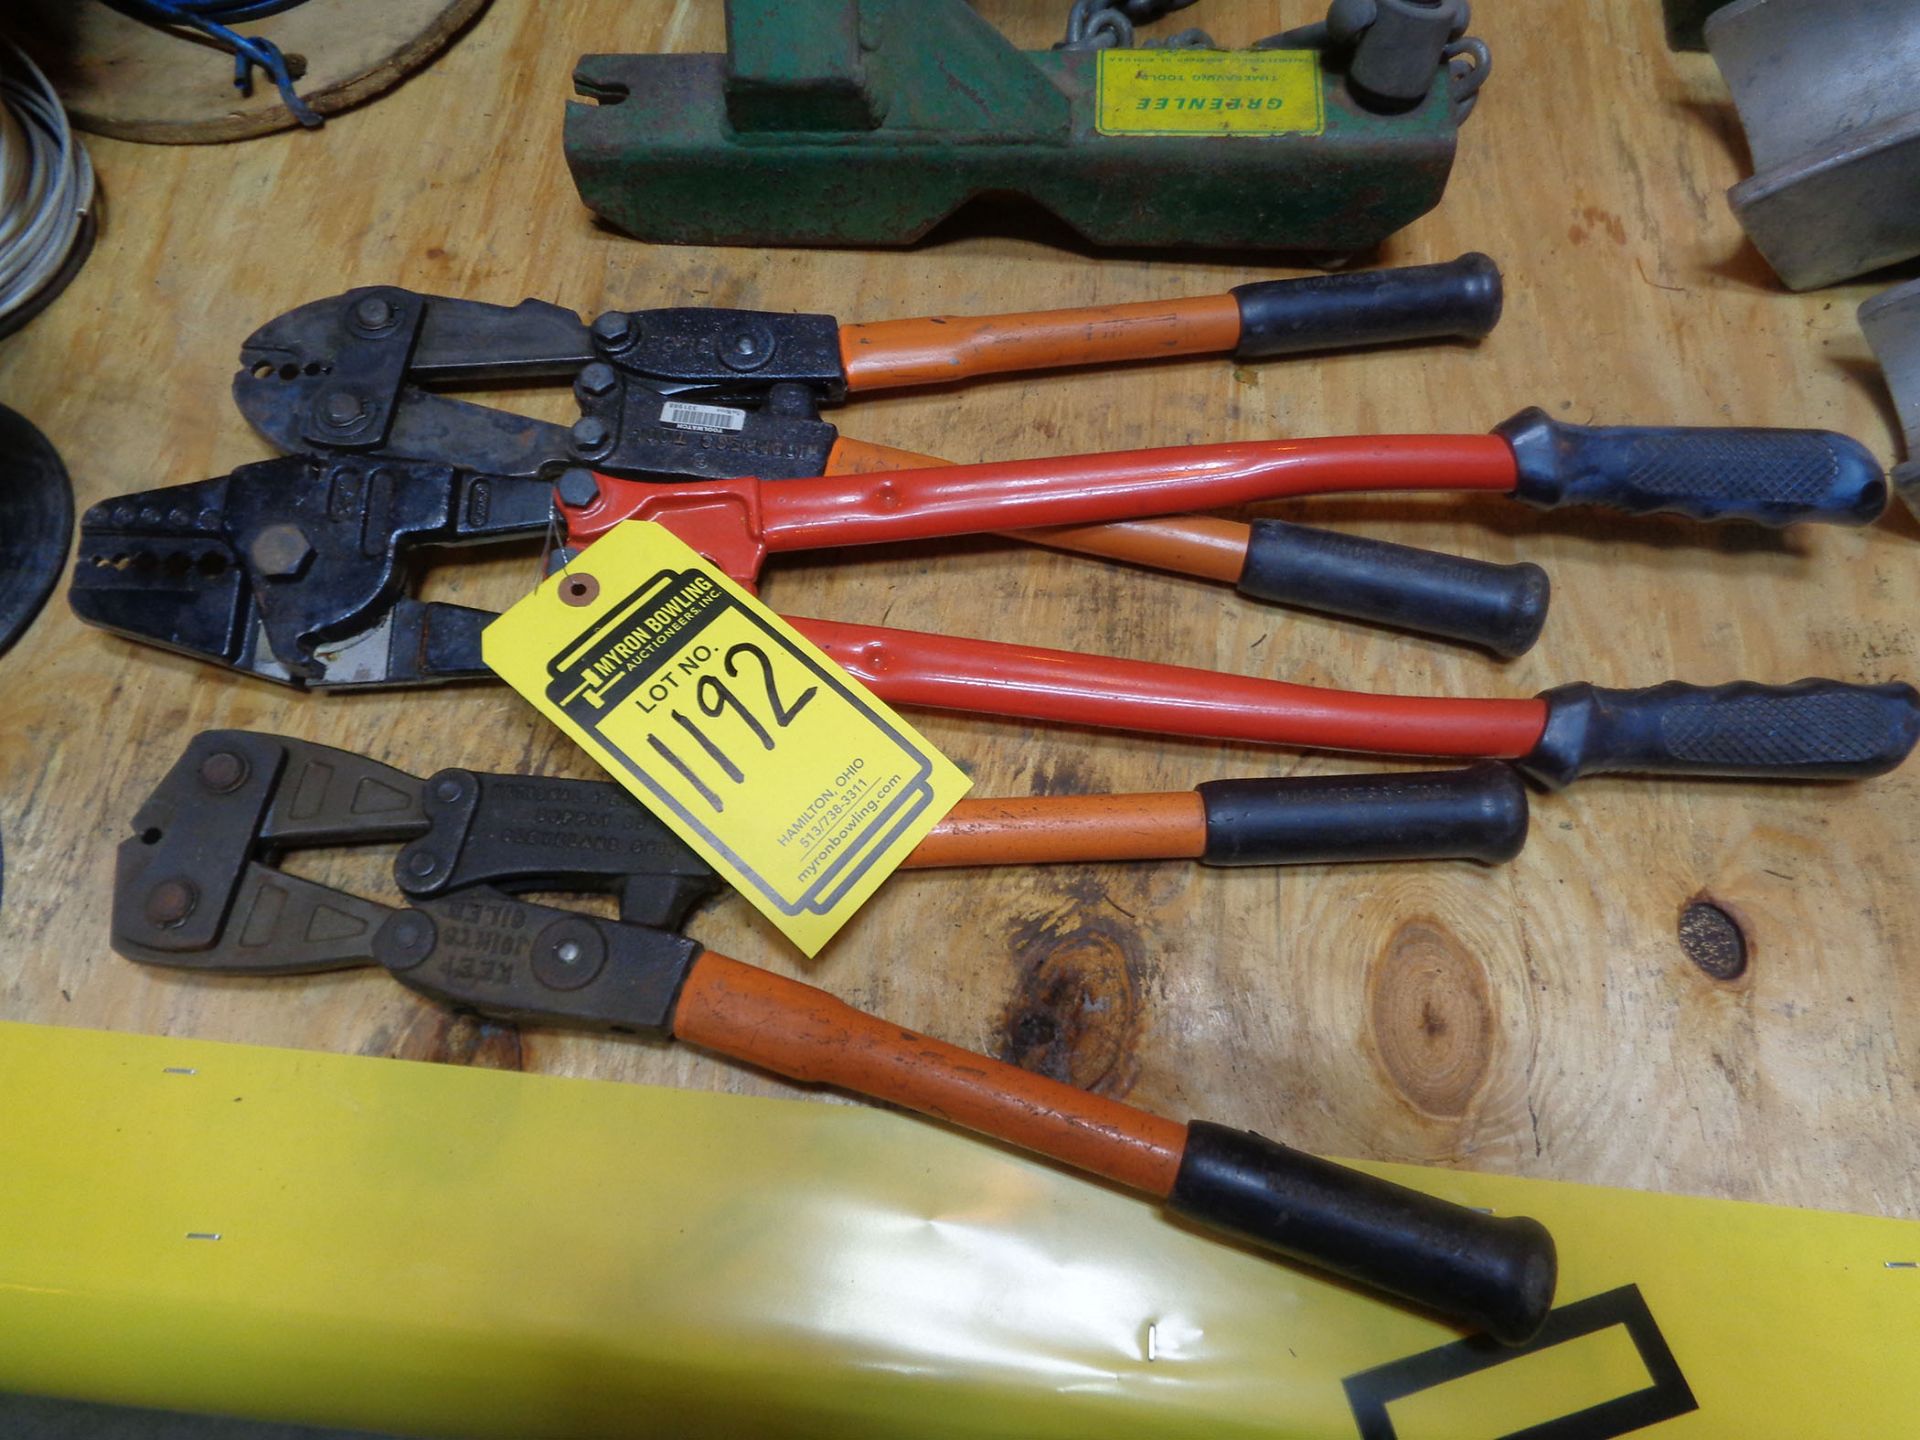 LOT OF WIRE CRIMPERS